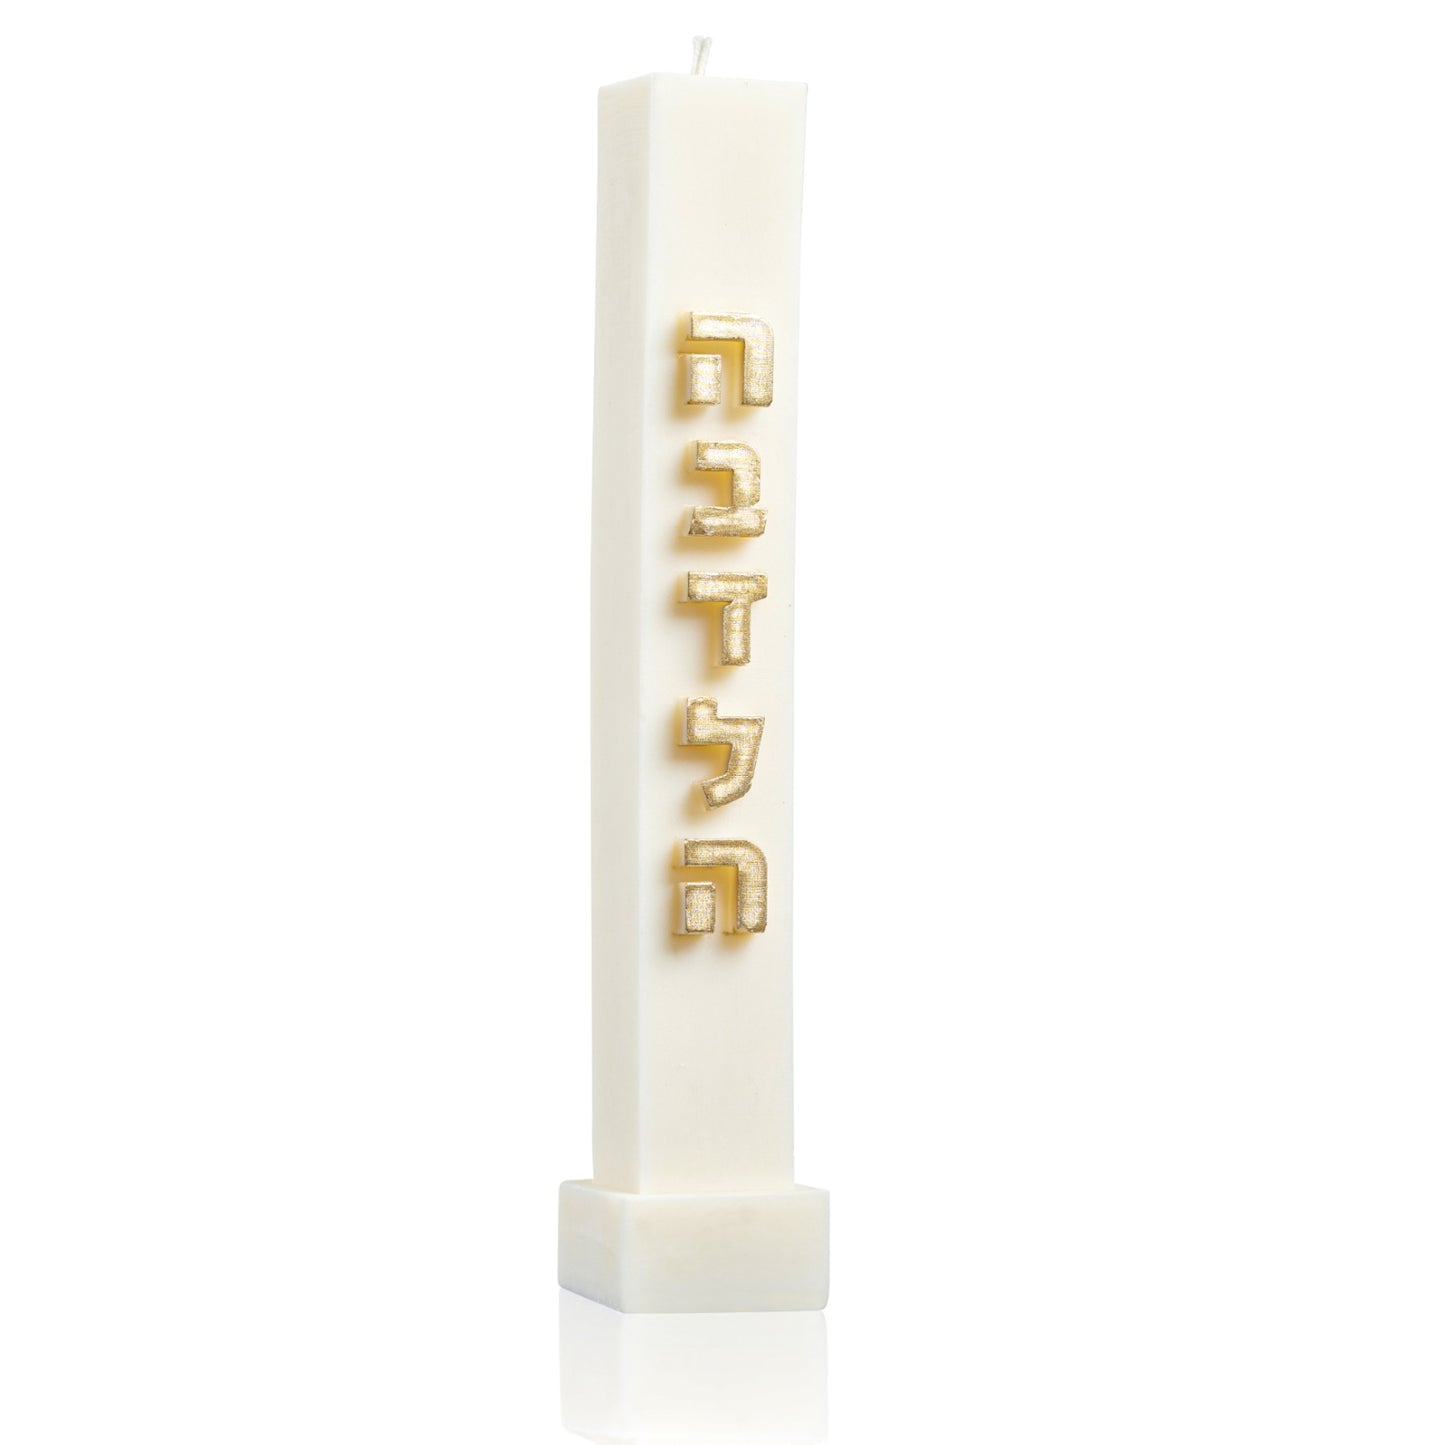 Embossed Havdallah Candle